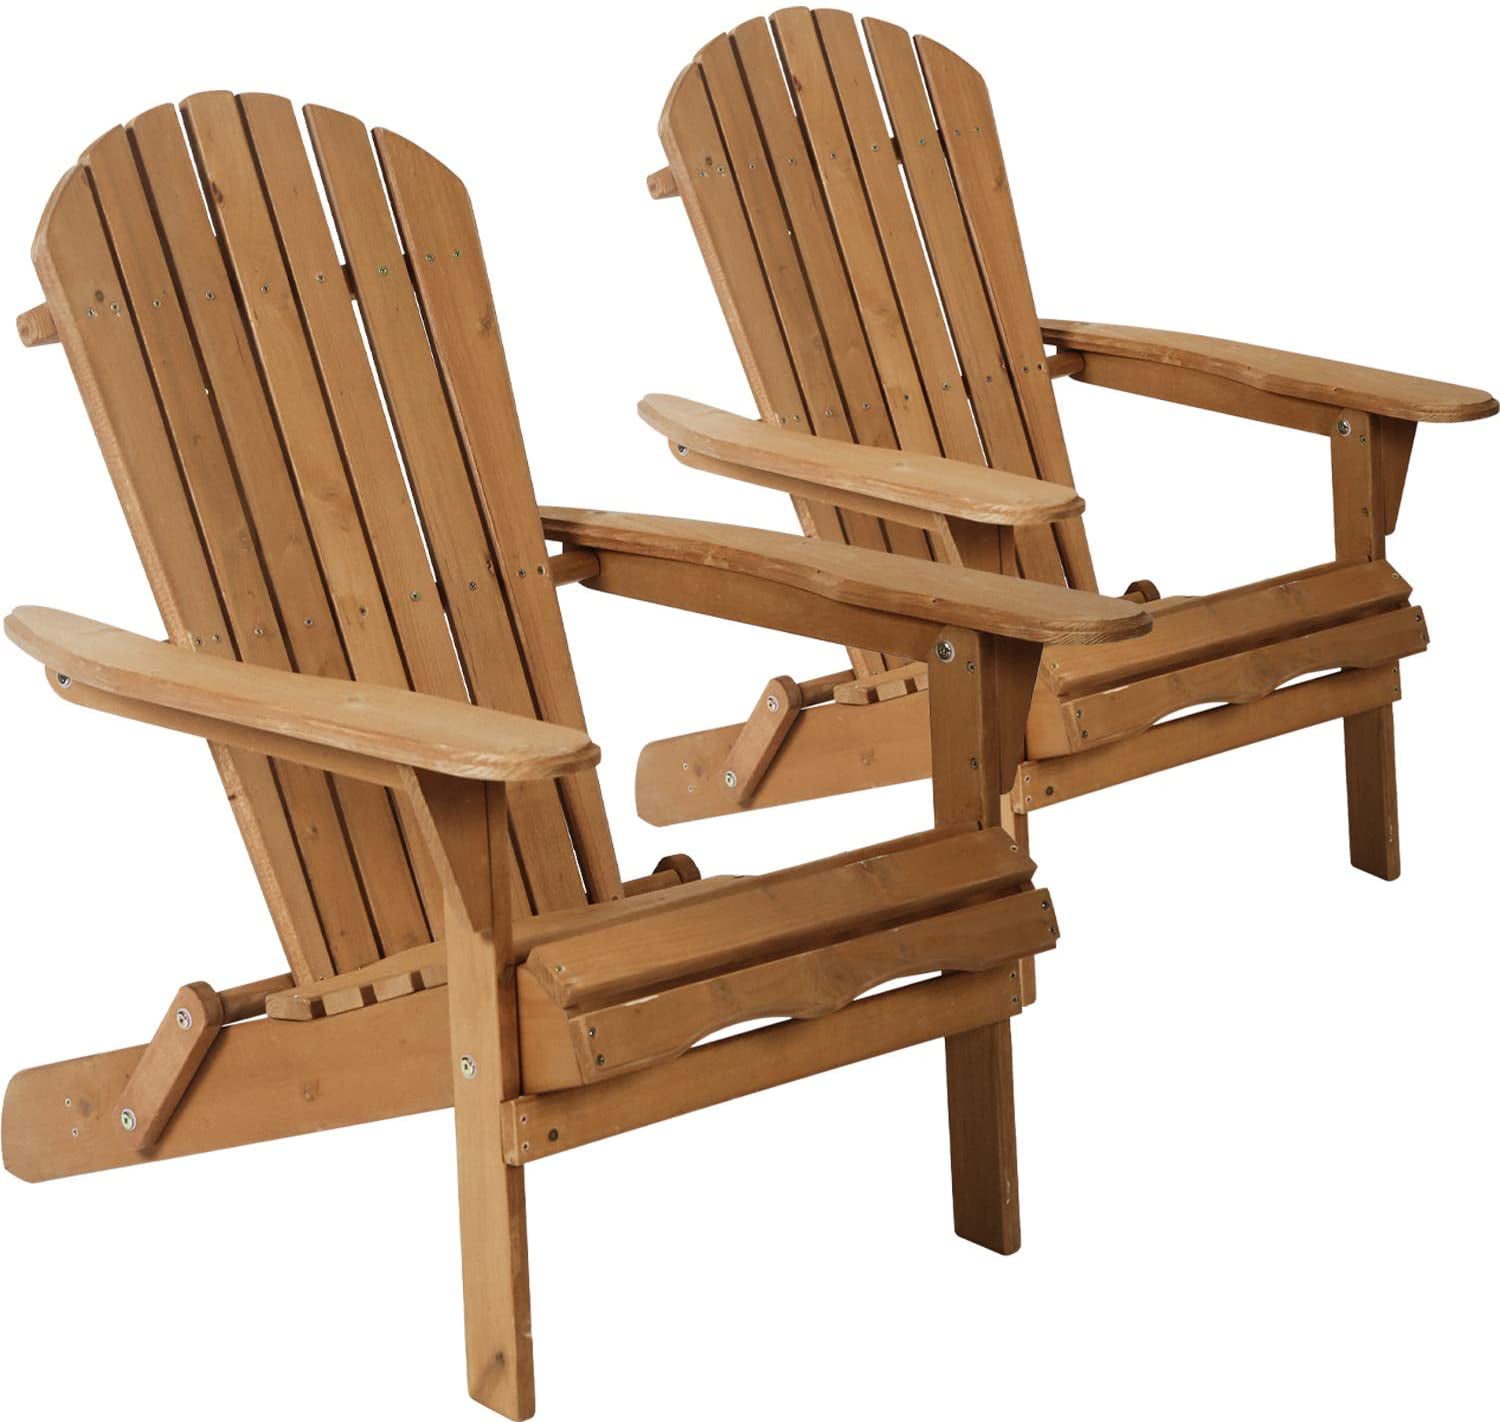 Fdw Adirondack Chair Patio Chairs, Fire Pit Lawn Chairs